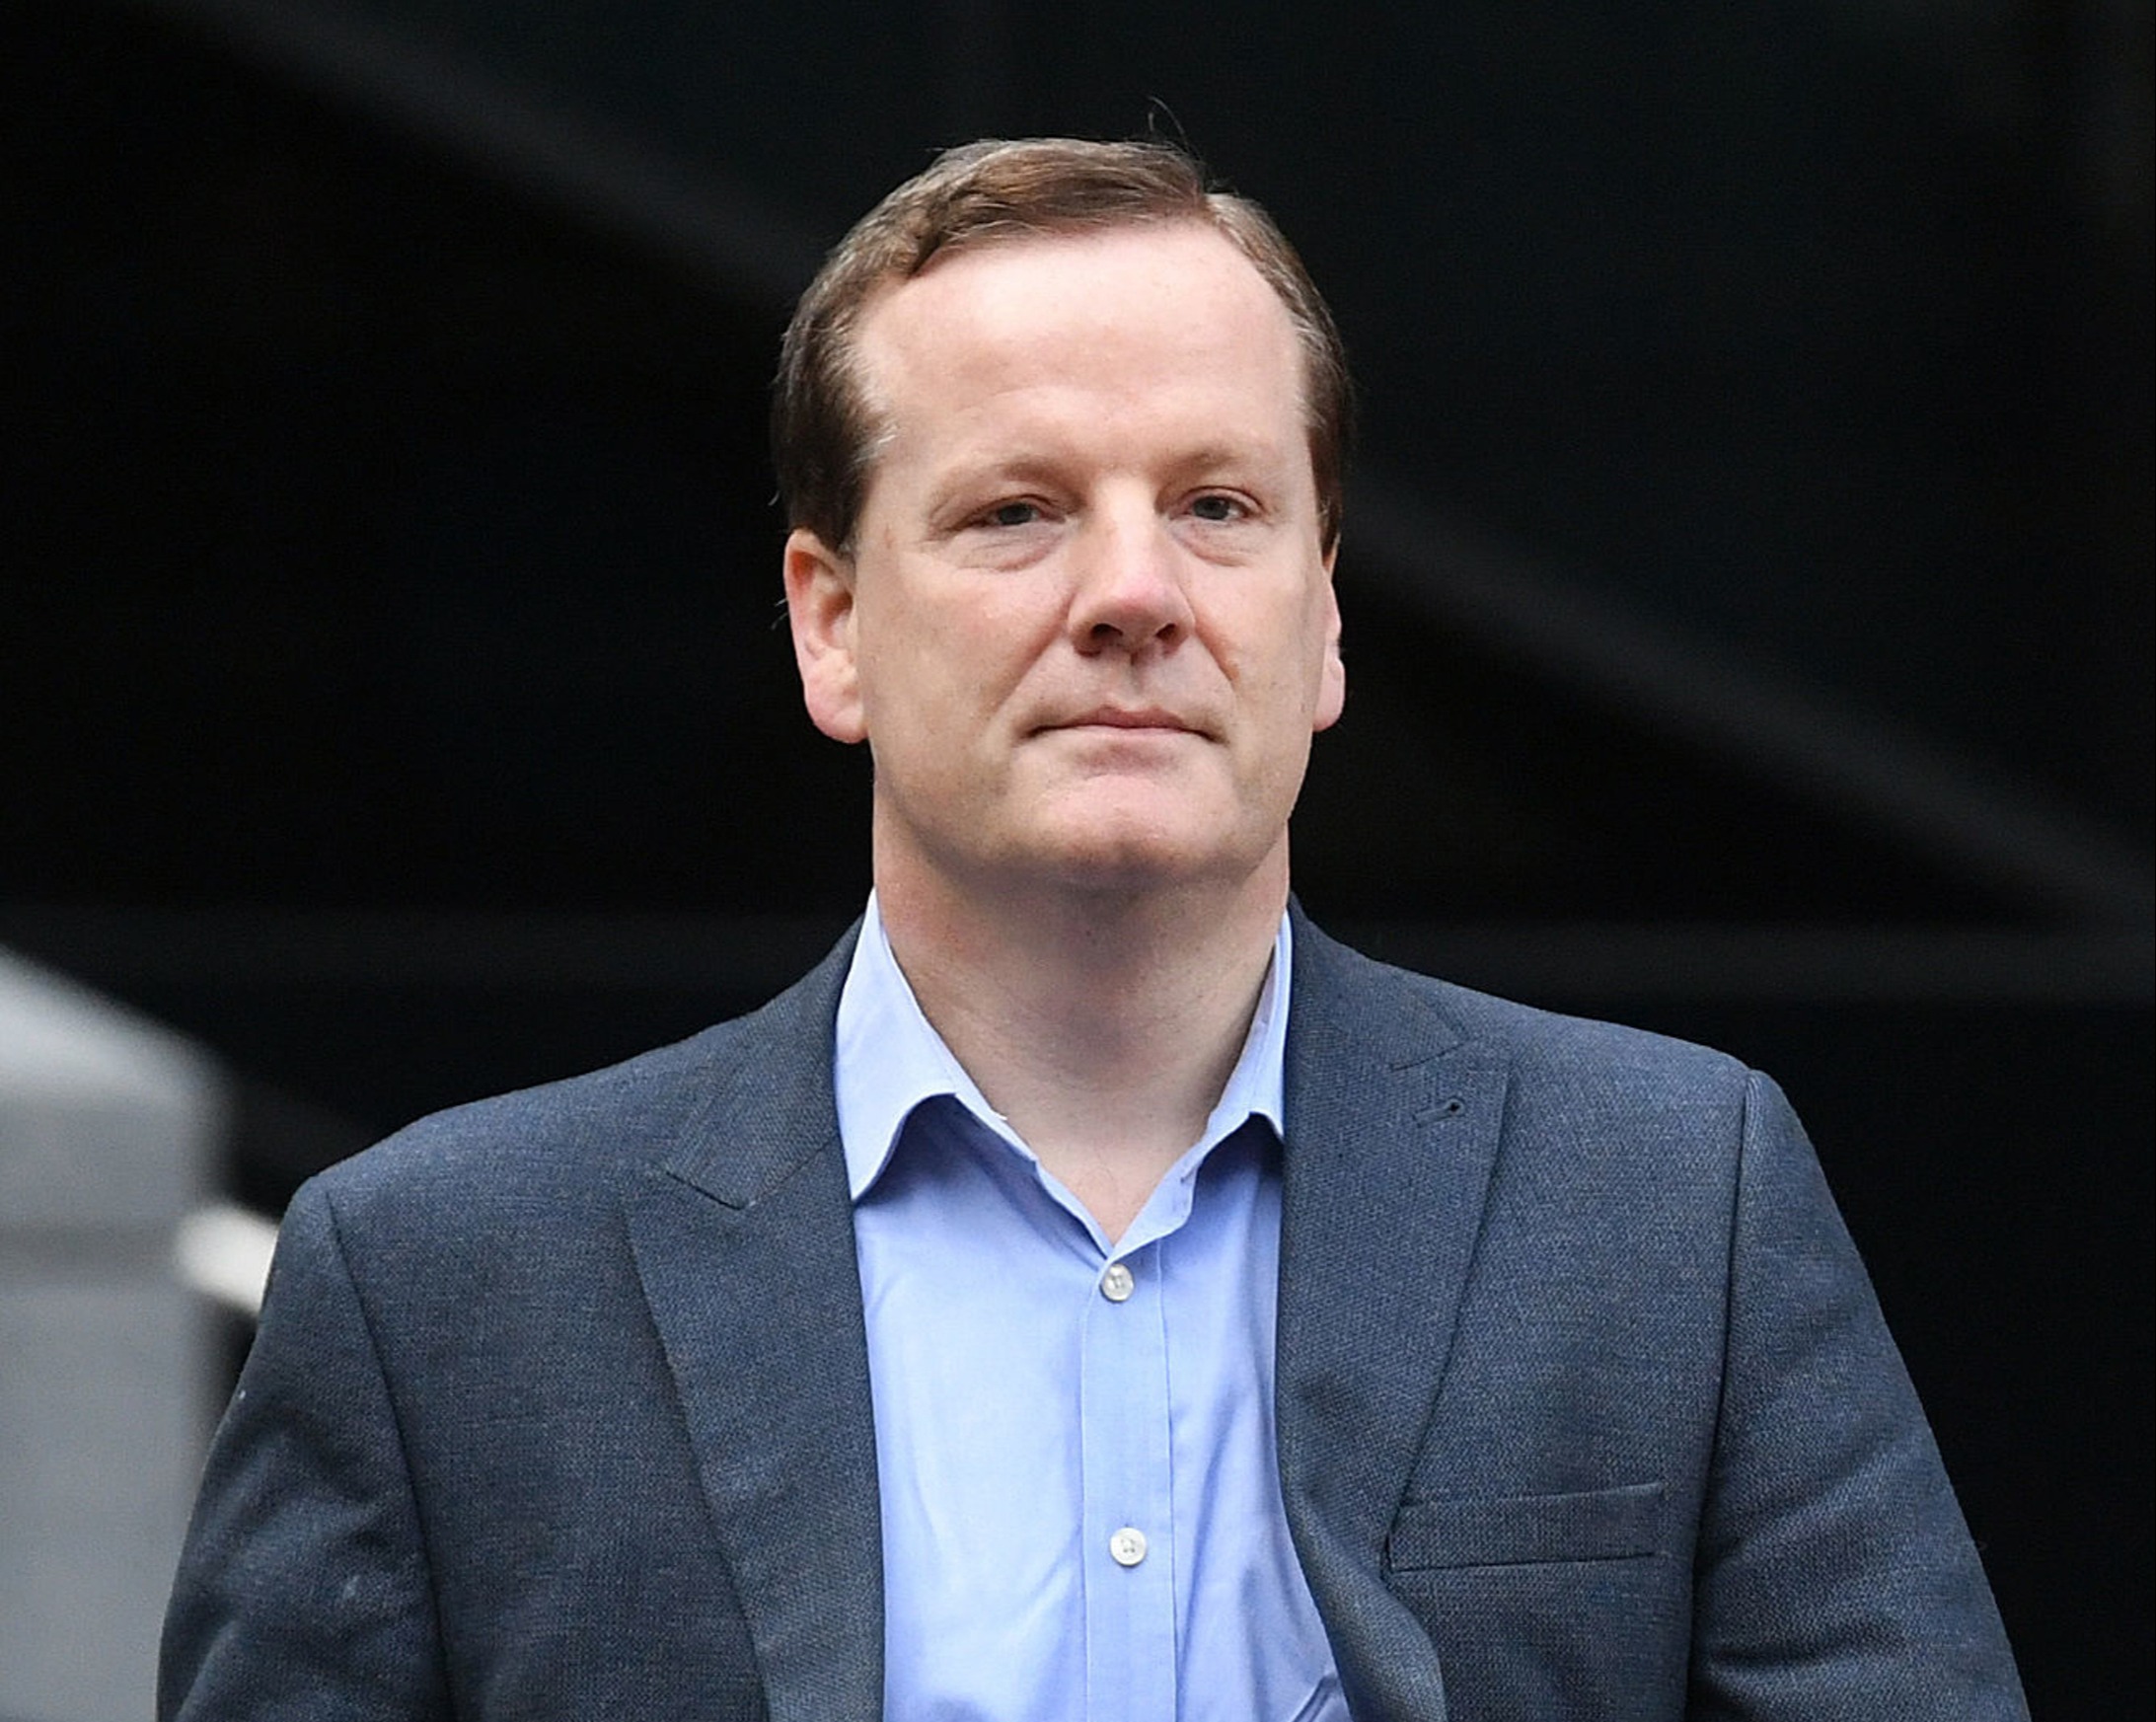 Charlie Elphicke was locked up for two years after being found guilty of sexually assaulting two women in 2020